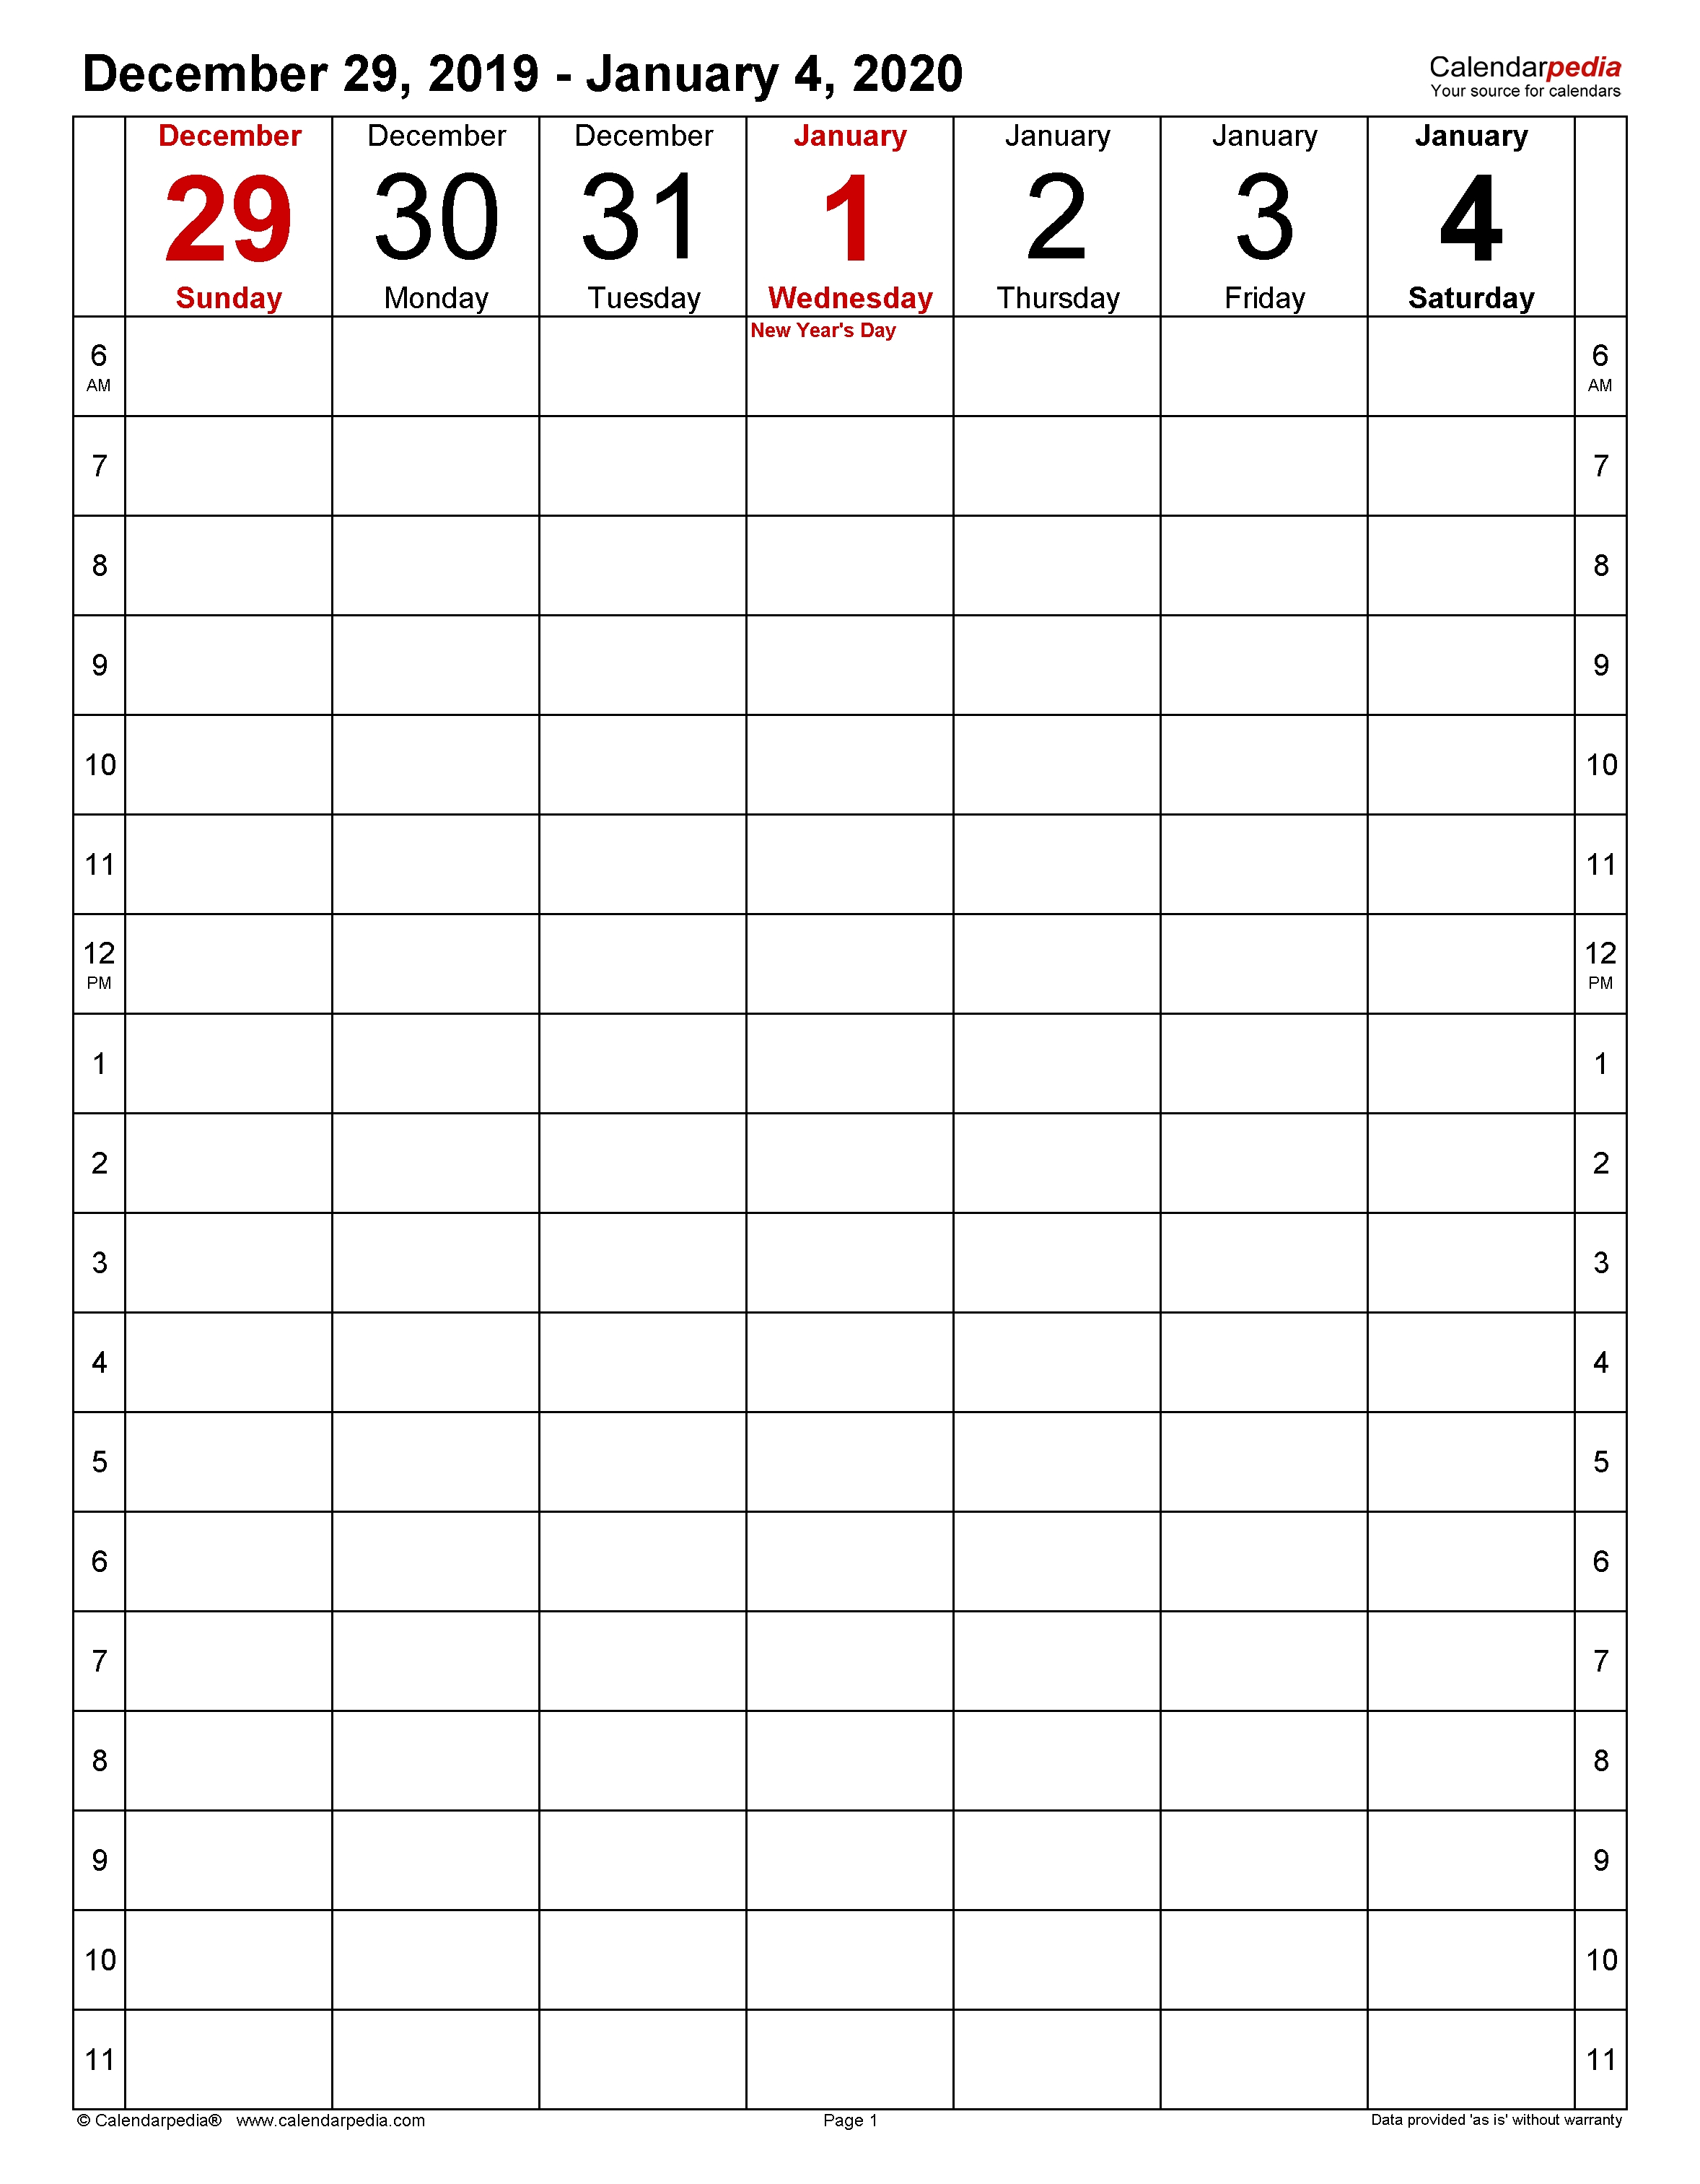 Weekly Calendars 2020 For Word - 12 Free Printable Templates-Weekly Hourly Template May Through September 2020